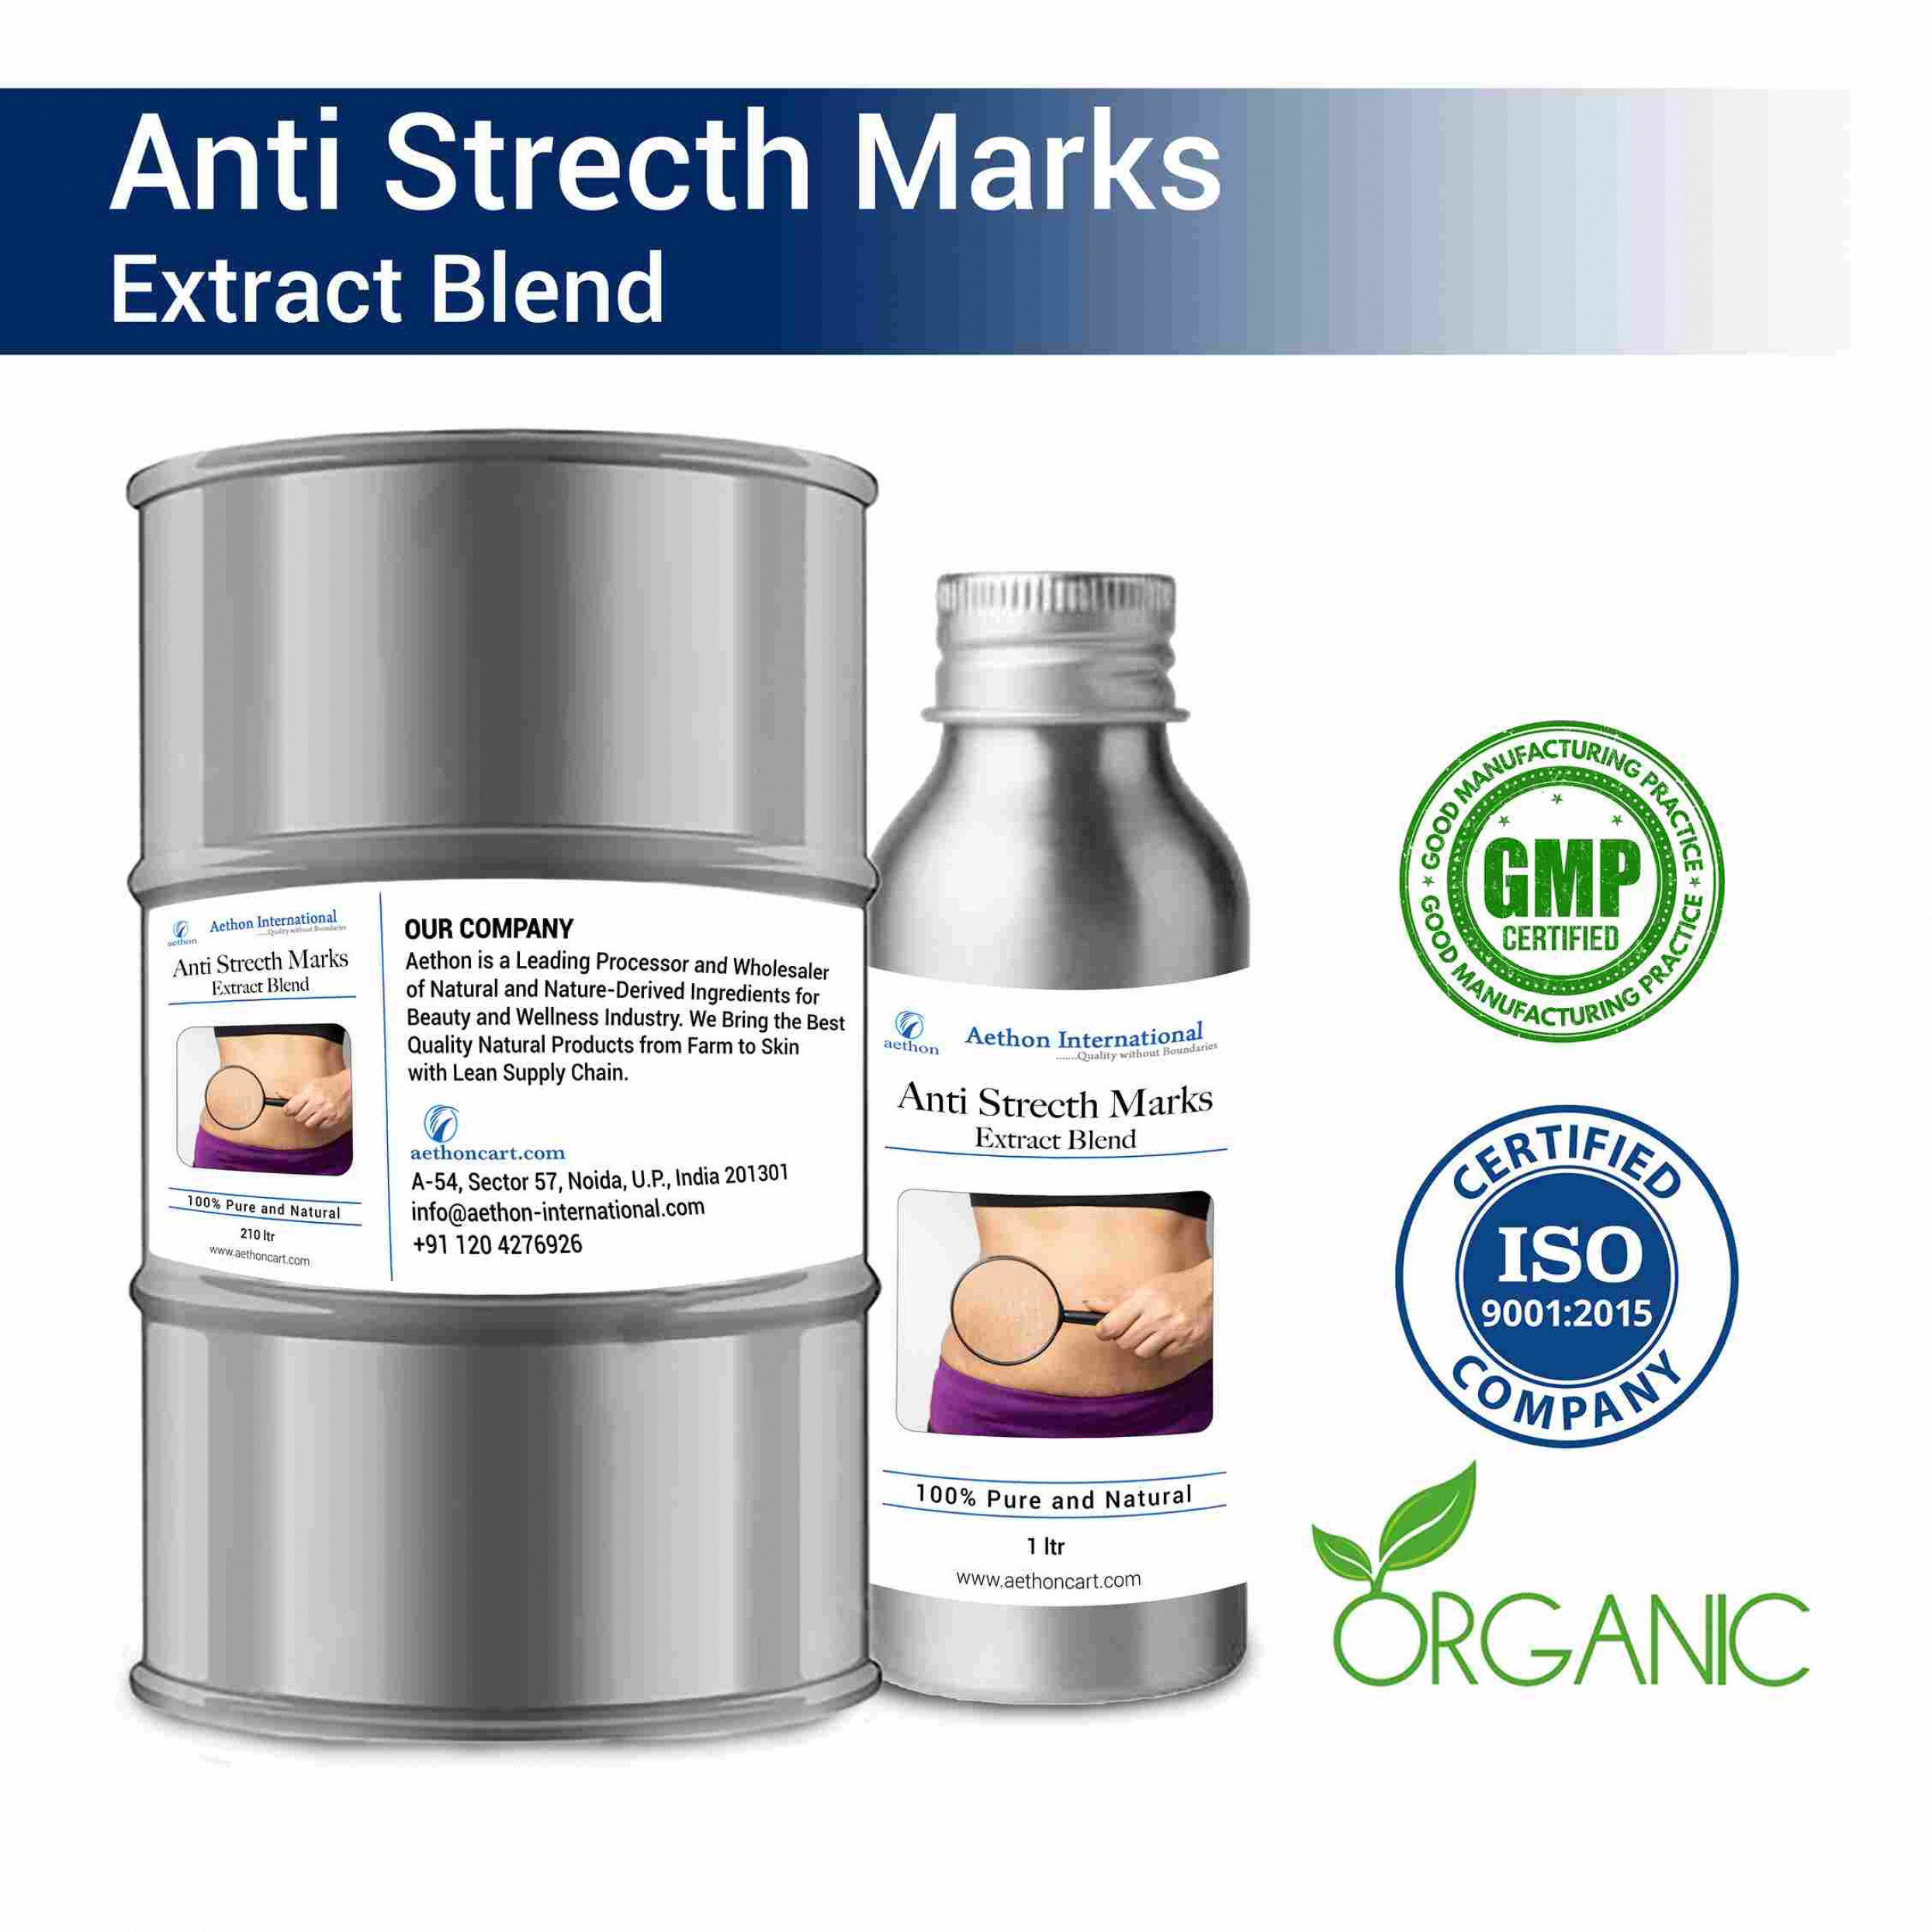 Anti Stretch Marks Extract Blend (Oil)